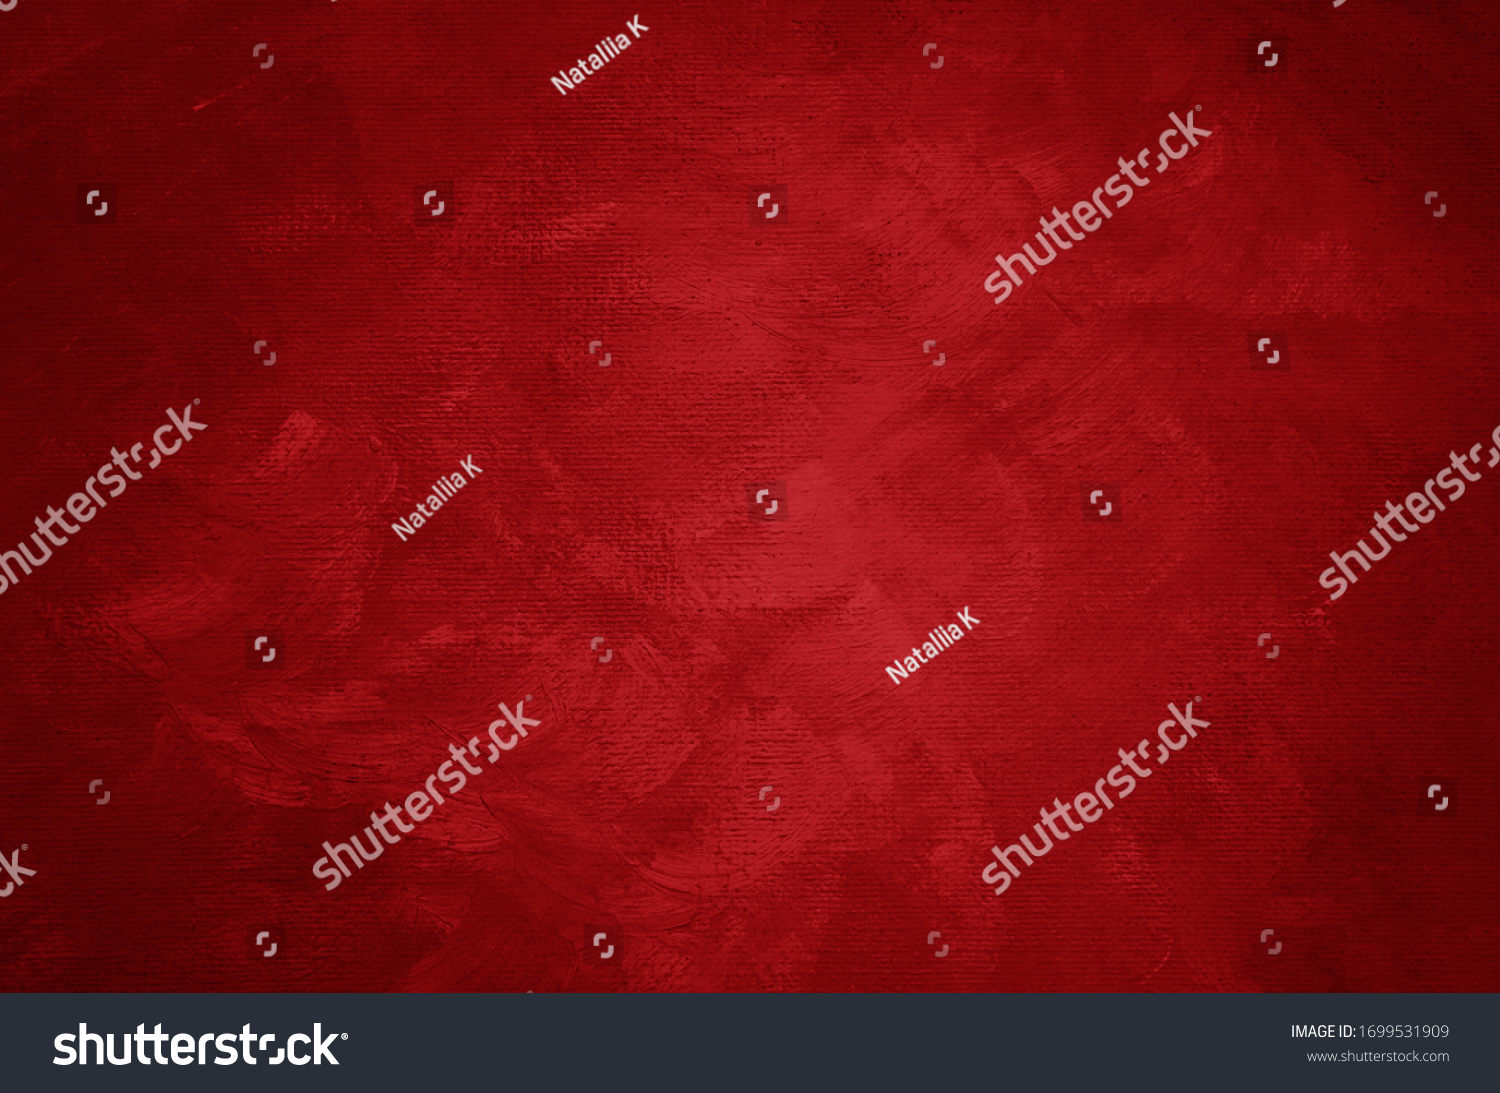 Abstract old red textured background. #1699531909